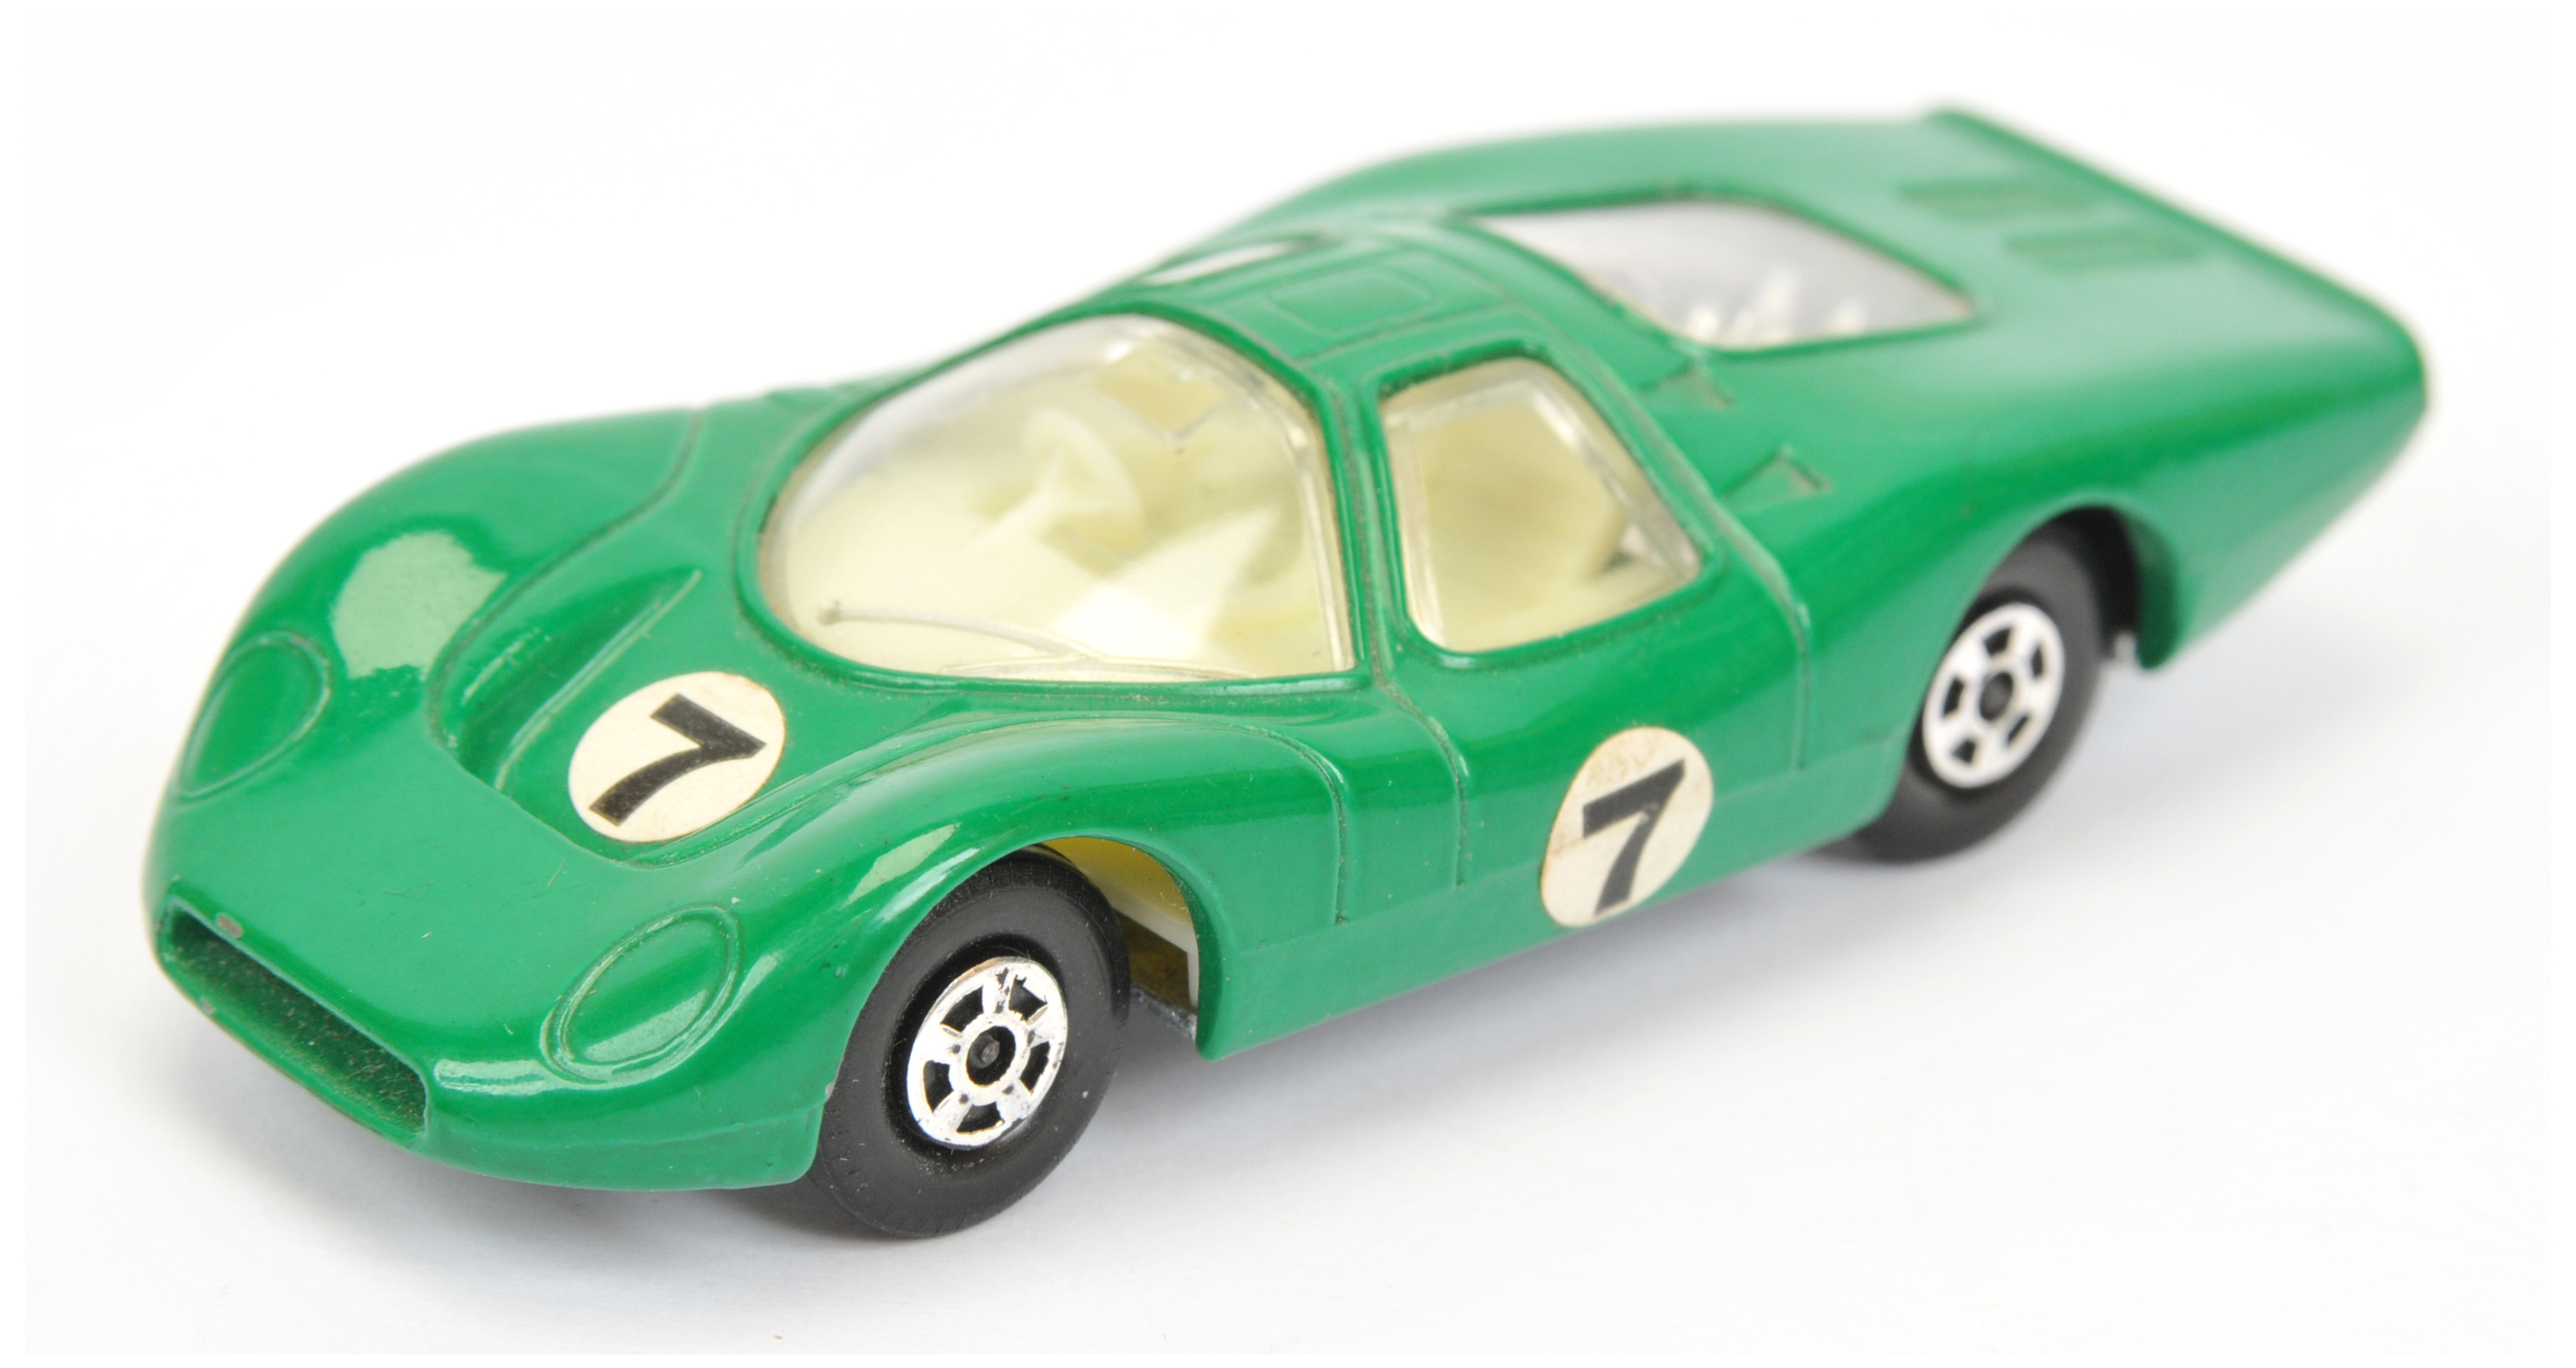 Matchbox Superfast 45a Ford Group 6 - Rare flat non-metallic green body with circular racing numb...